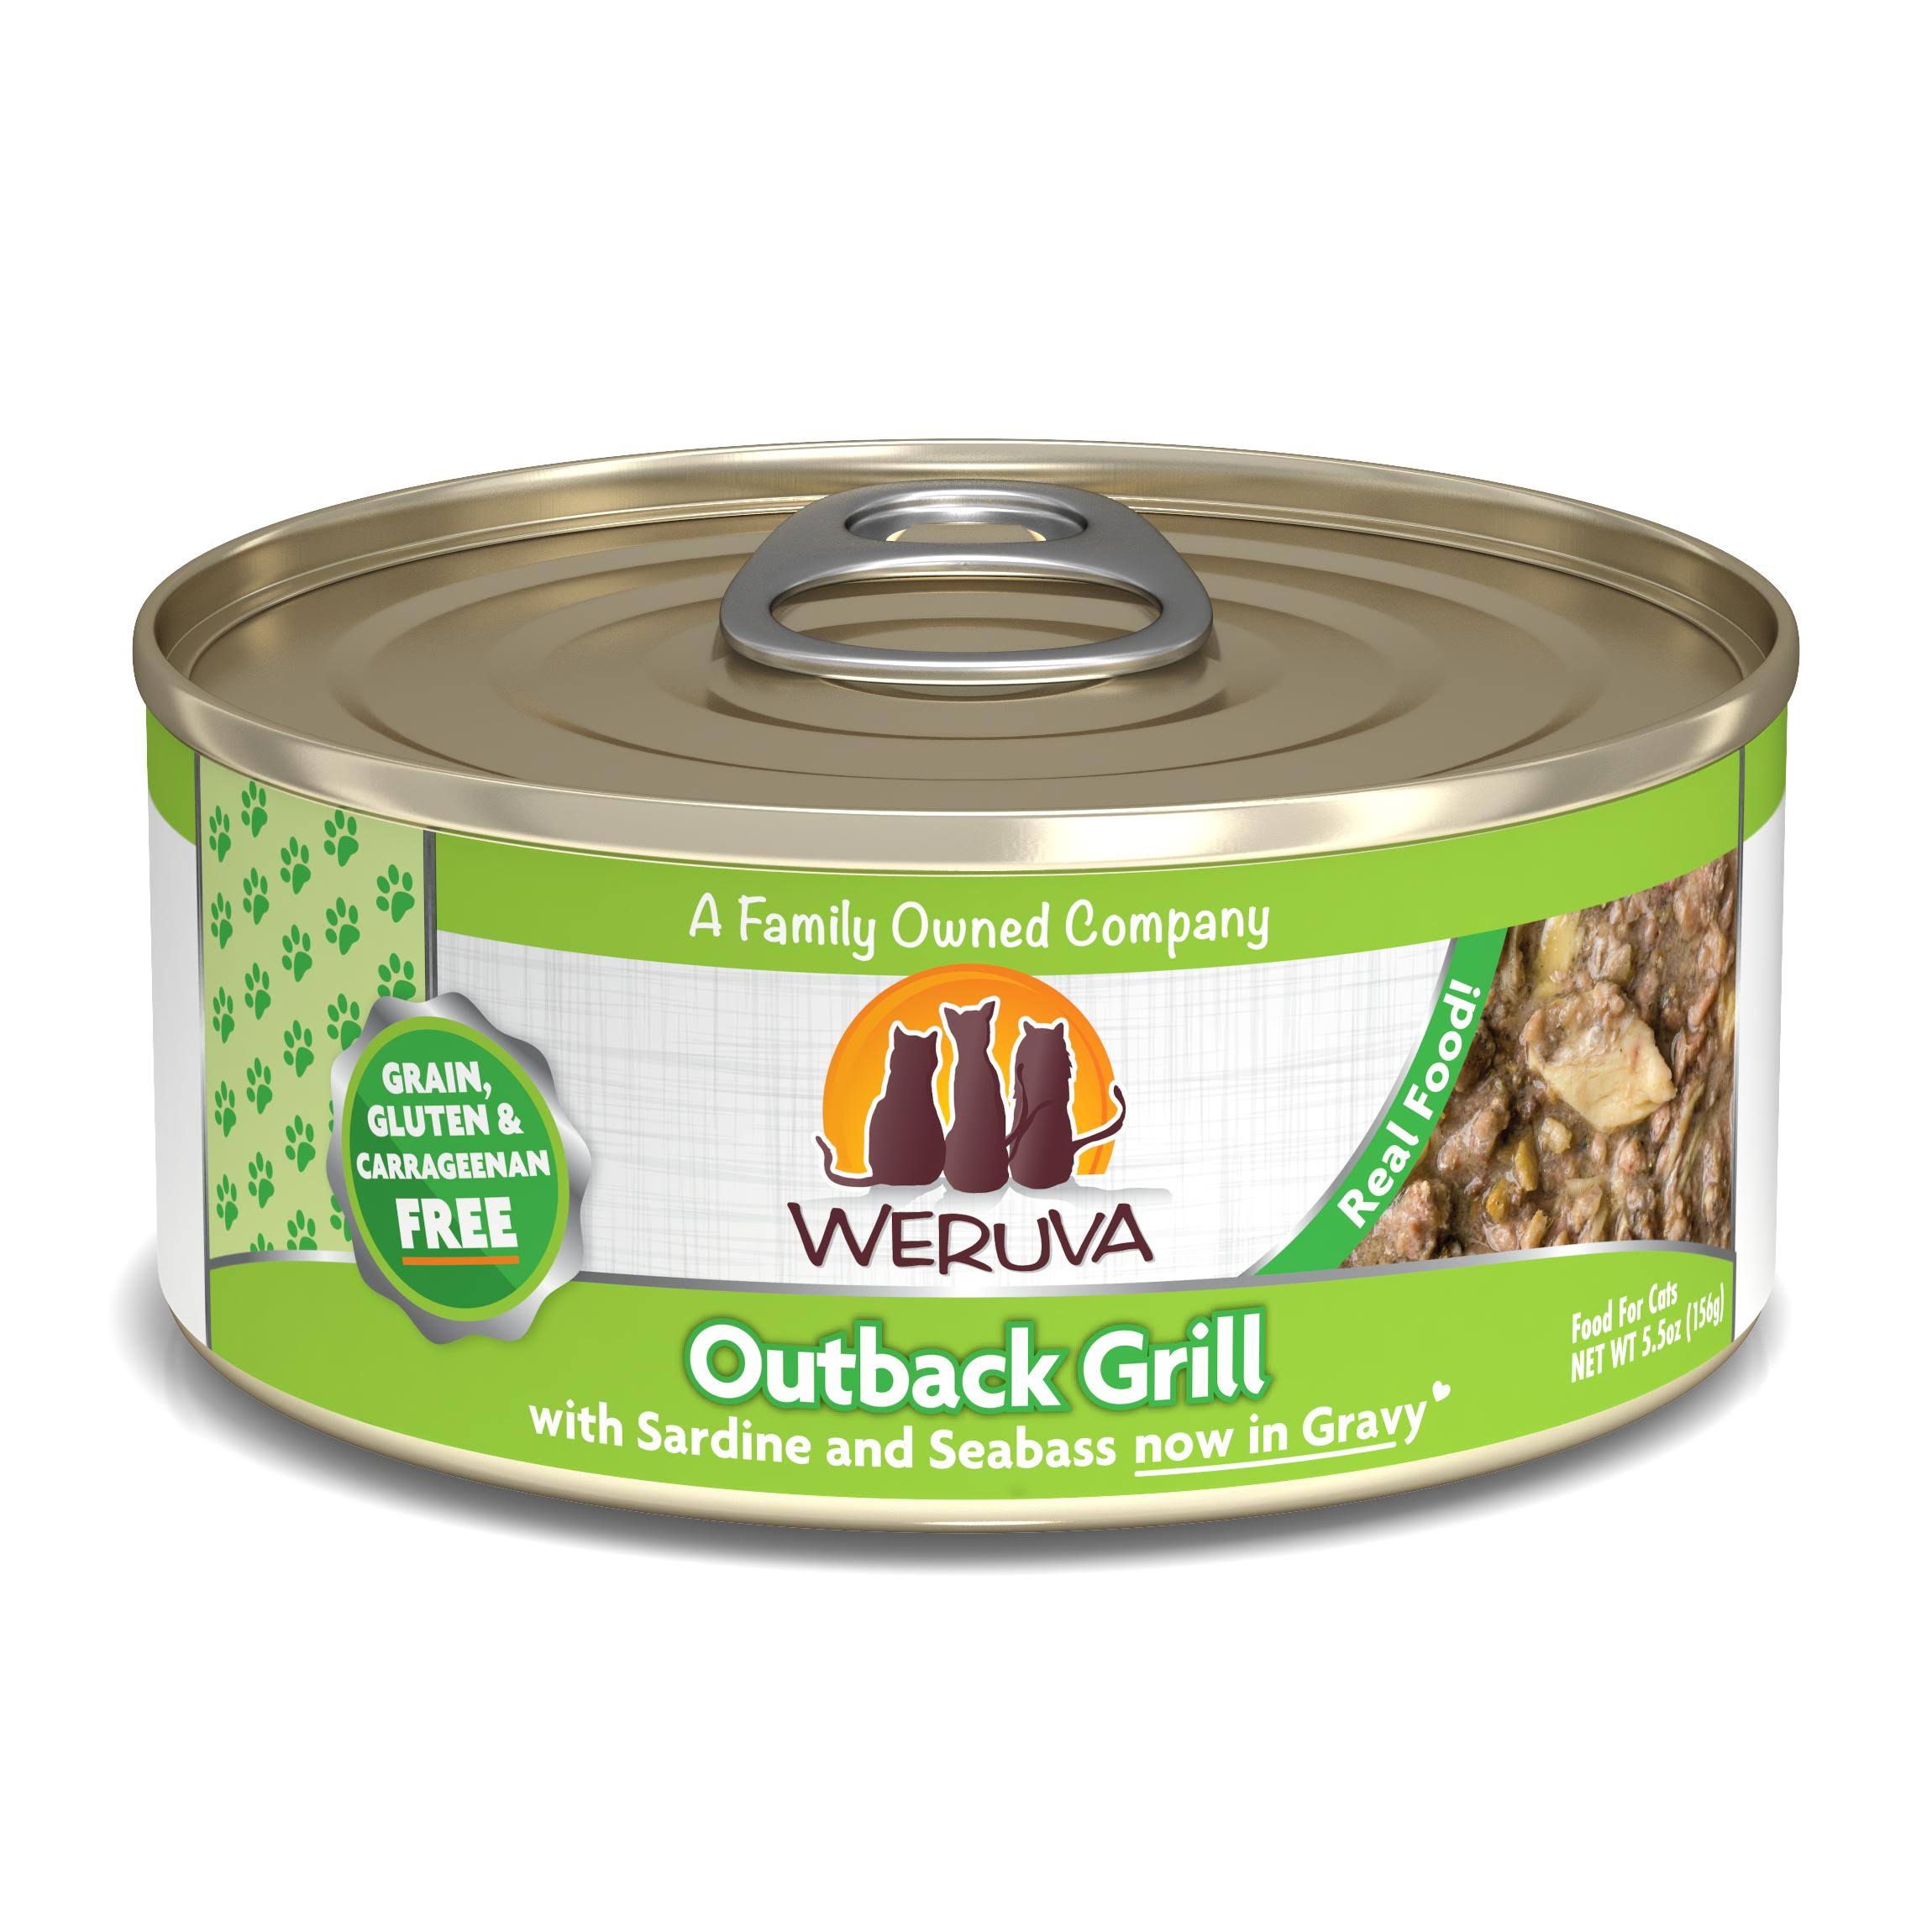 Weruva Cat Canned Outback Grill 5.5 oz